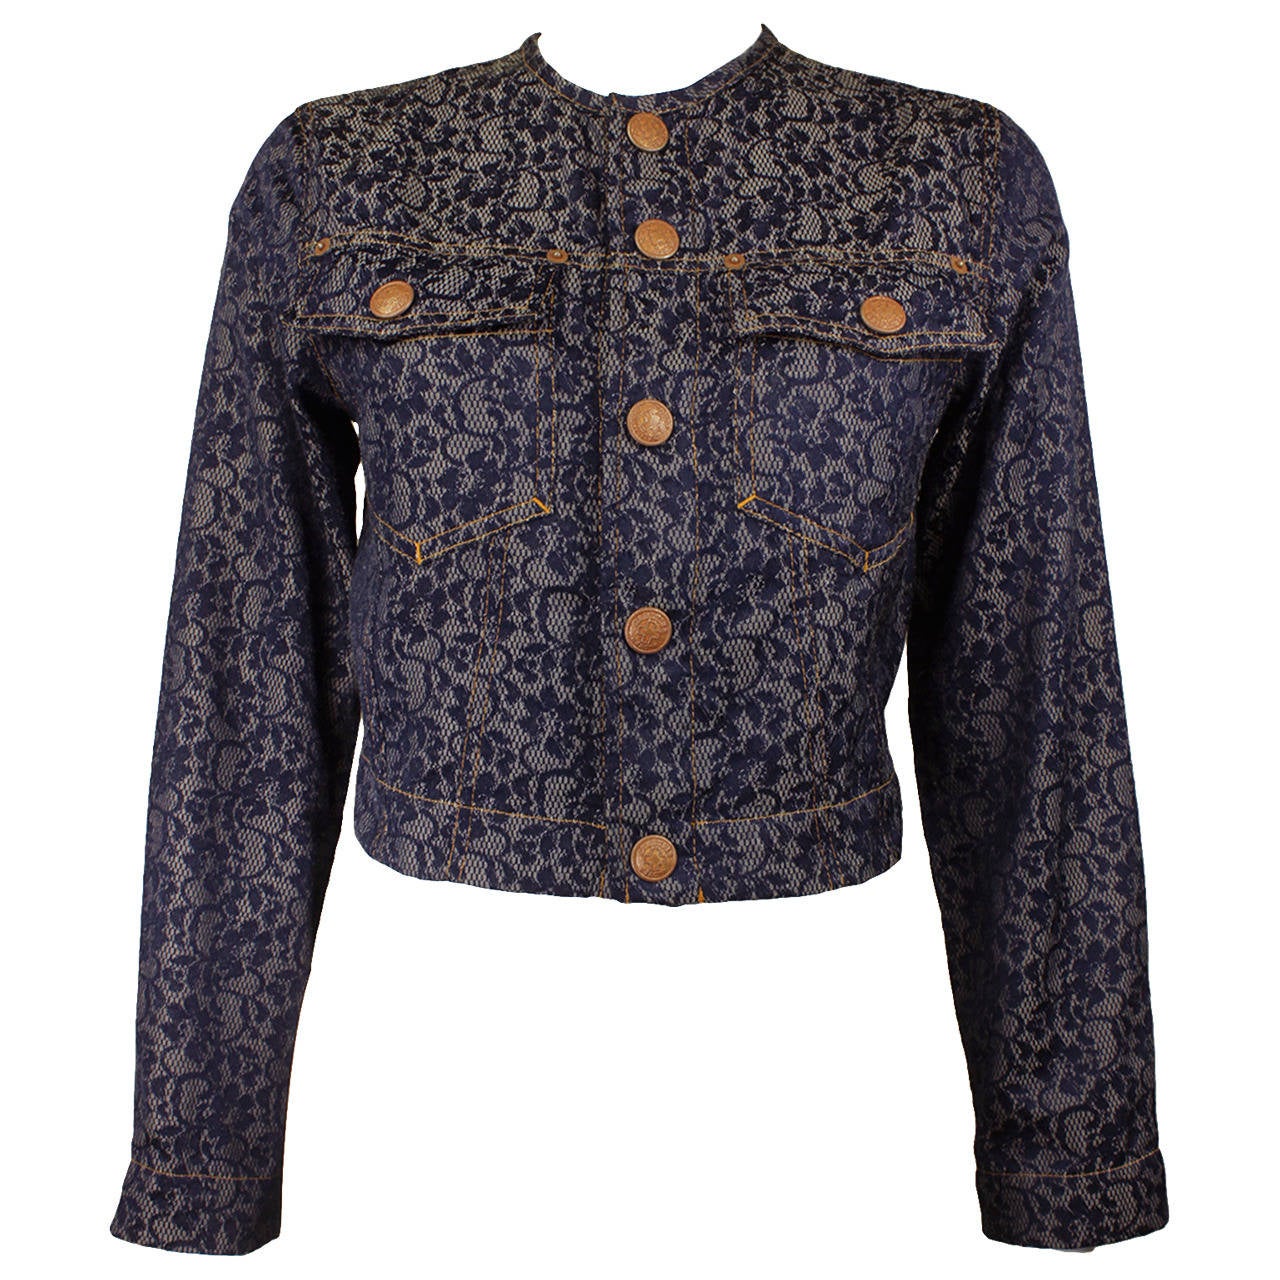 Jean Paul Gaultier Cropped Lace Printed Jacket